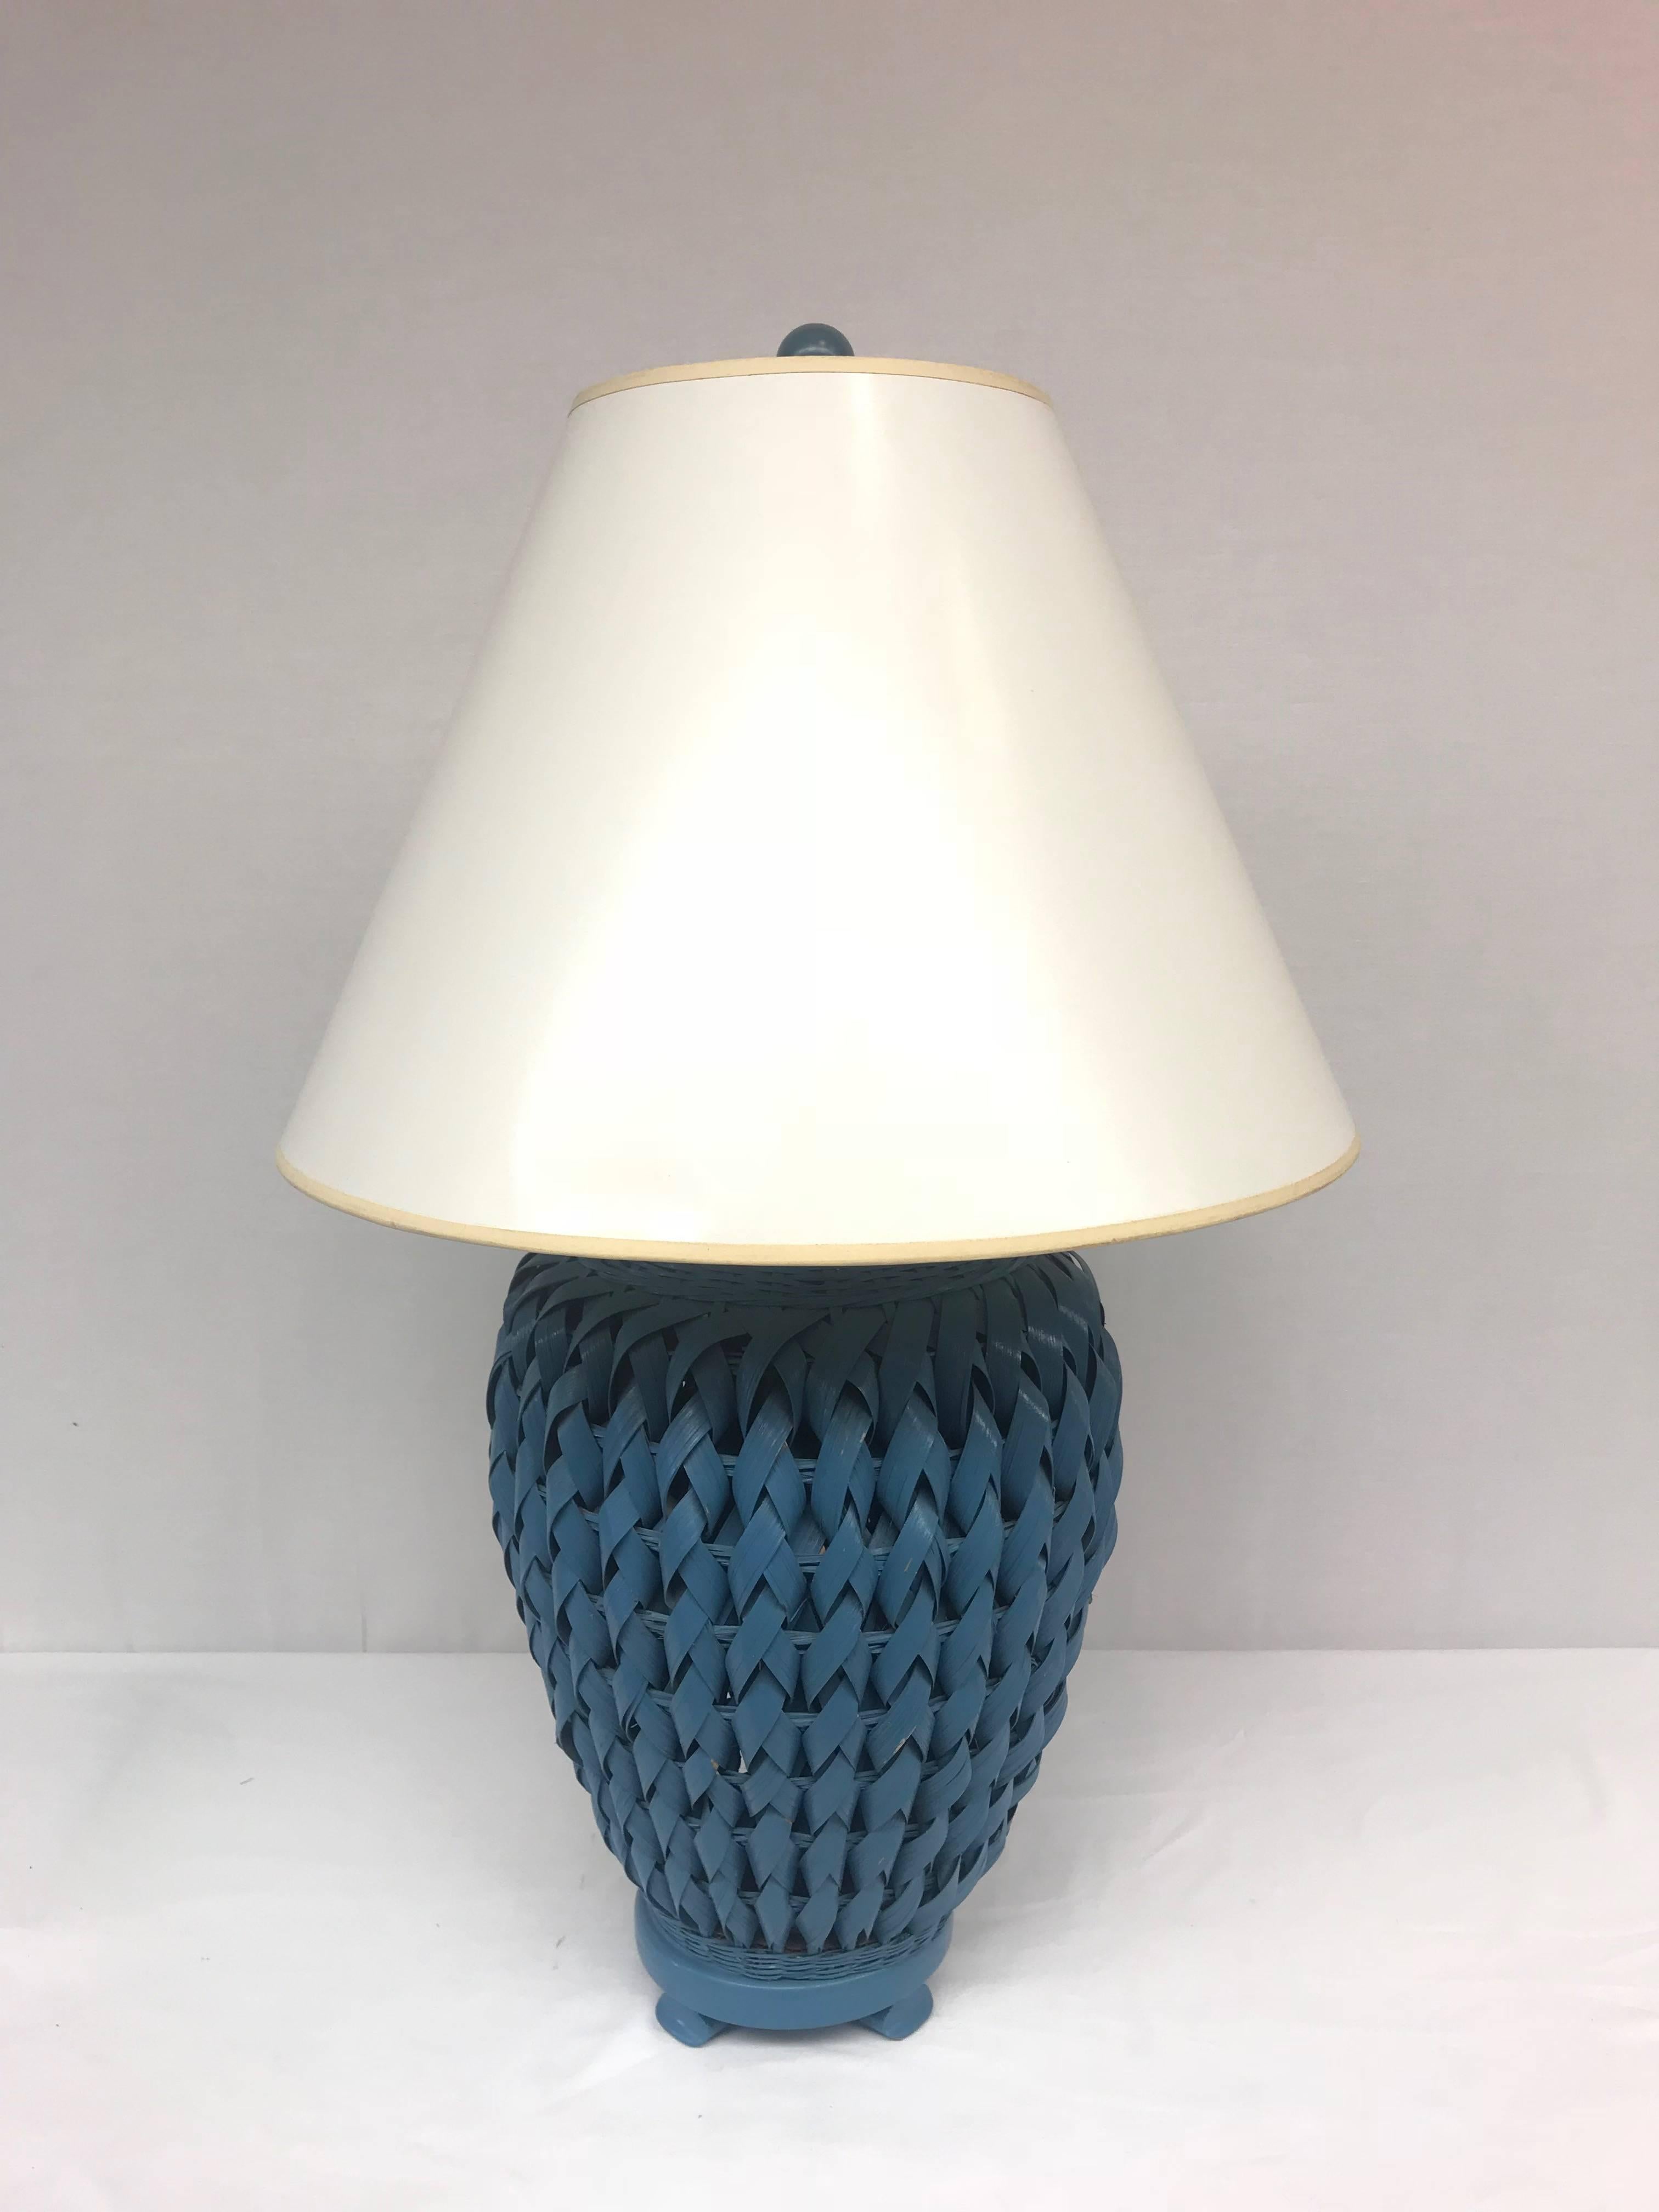 A unique blue-painted, woven wicker table lamp topped with a lacquered cream-colored paper shade. 60 watt bulb max. Lamp works and wiring is in good shape, but lamp has not been rewired.
Shade Dimensions: 9